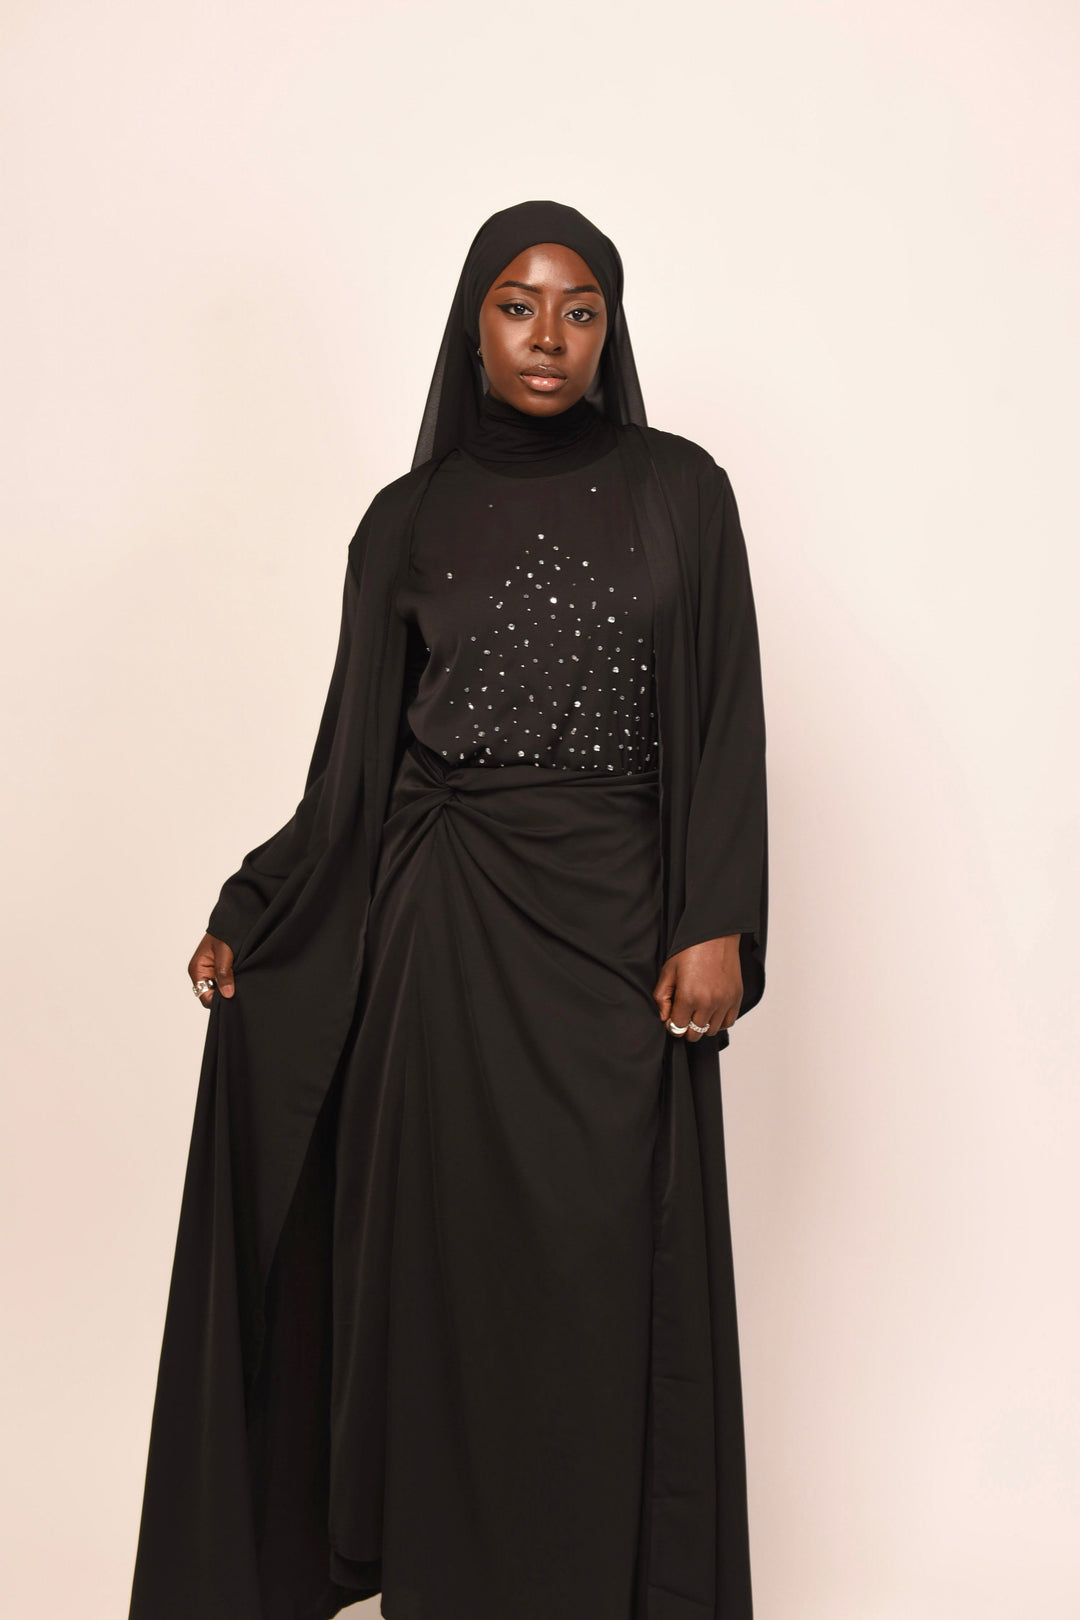 Get trendy with Inaya 4-Piece Abaya Set - Black -  available at Voilee NY. Grab yours for $54.90 today!